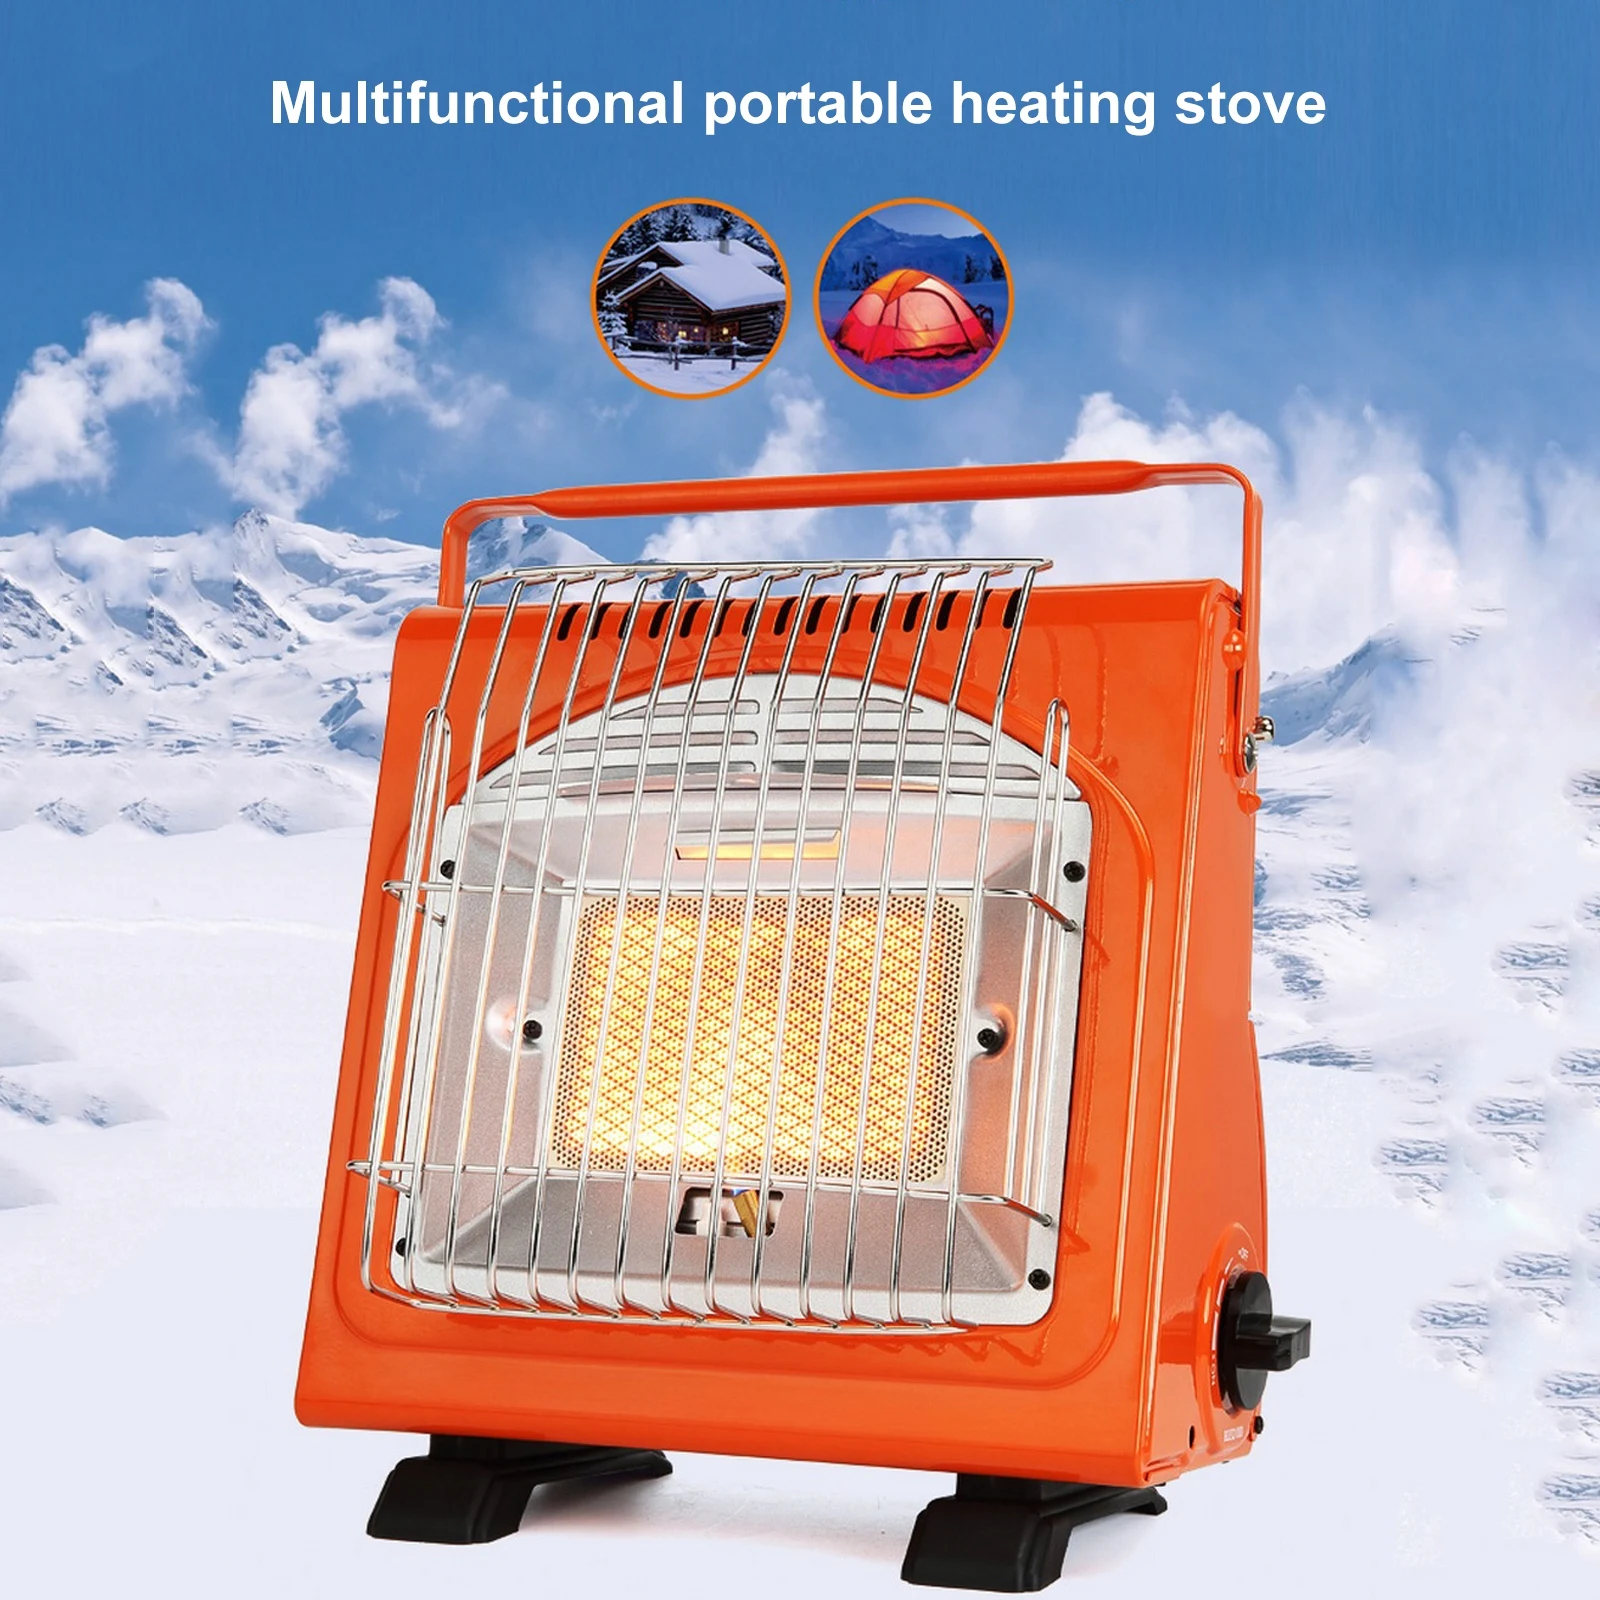 Outdoor Camping Heating Gas Stove Multifunctional Portable Gas Heater Winter Warmer Camping Stove Tent Heated Burner